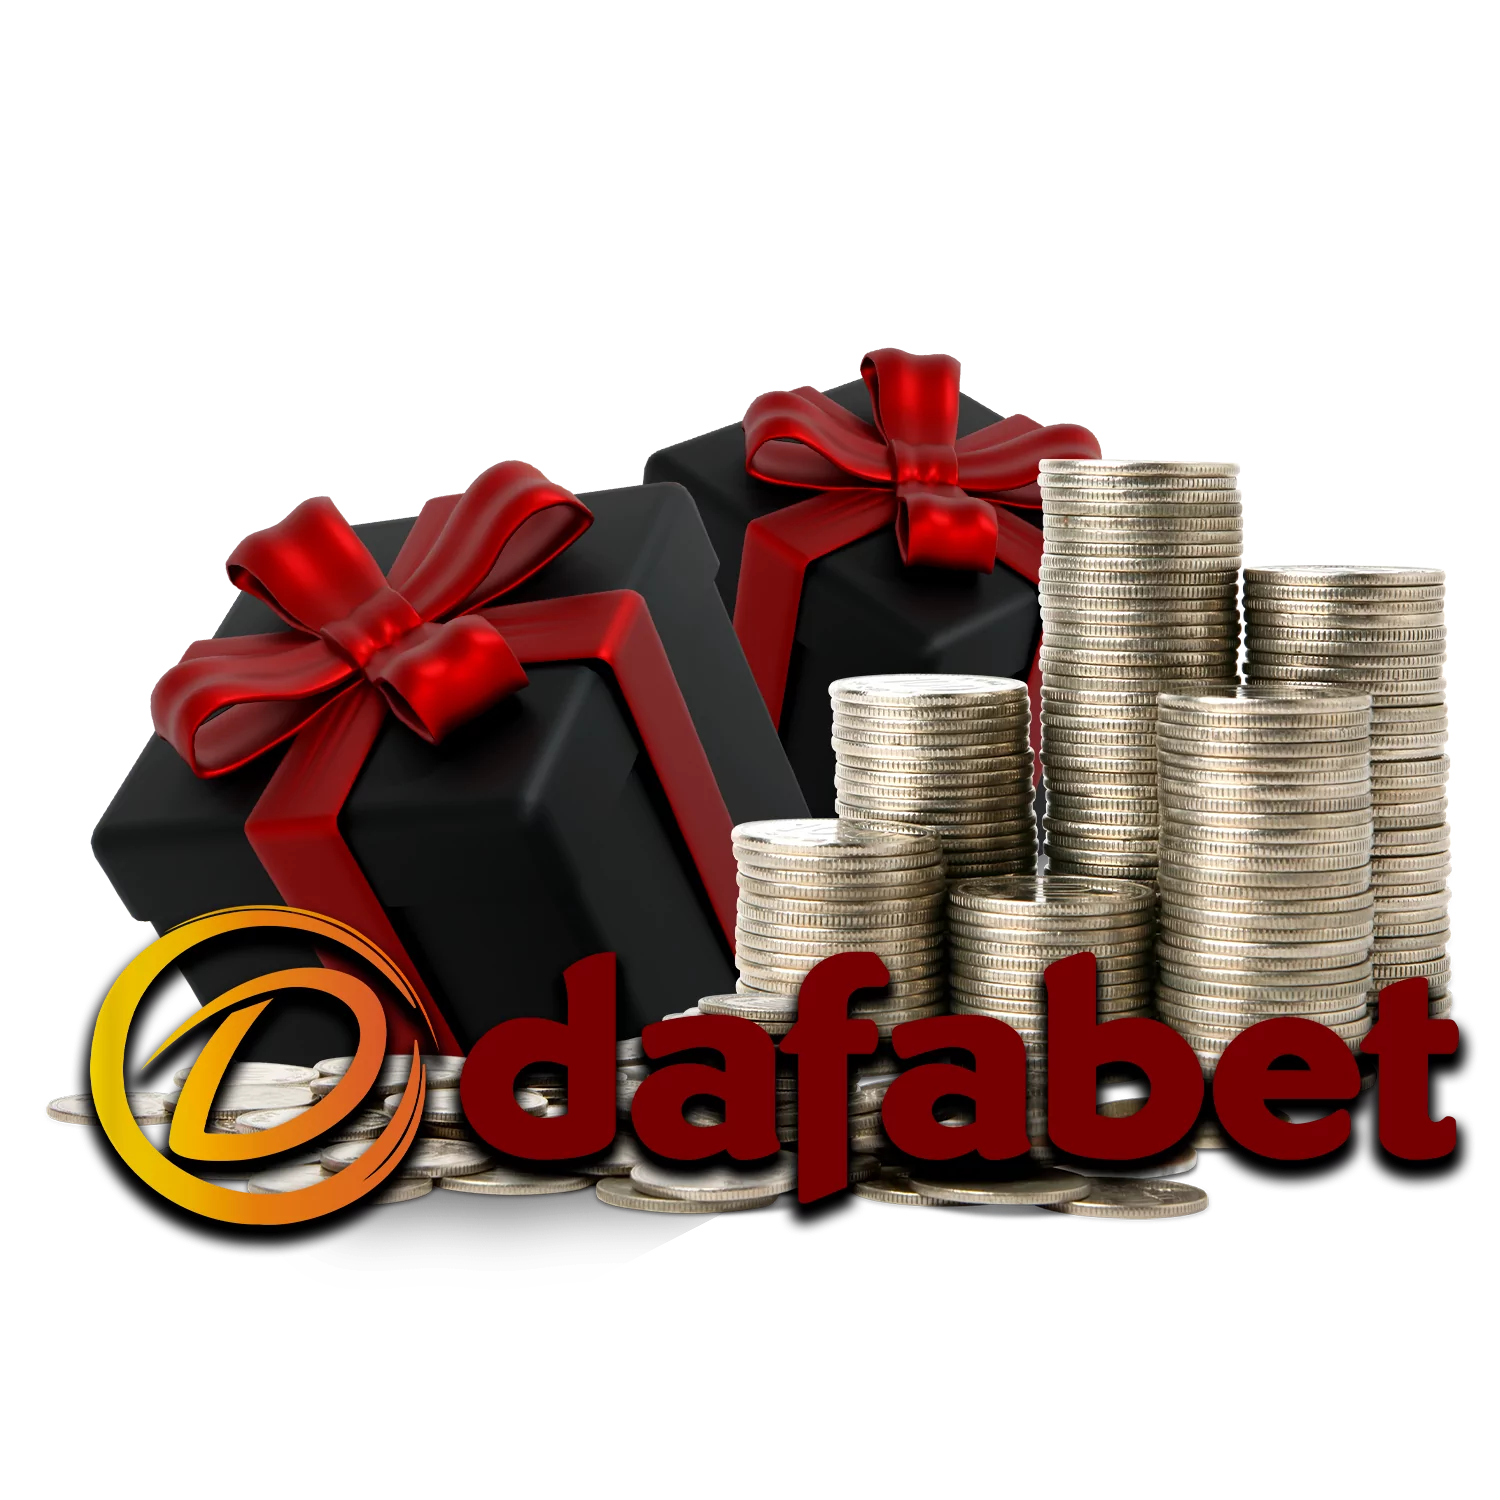 Learn how to get the Dafabet welcome bonus and win it back.